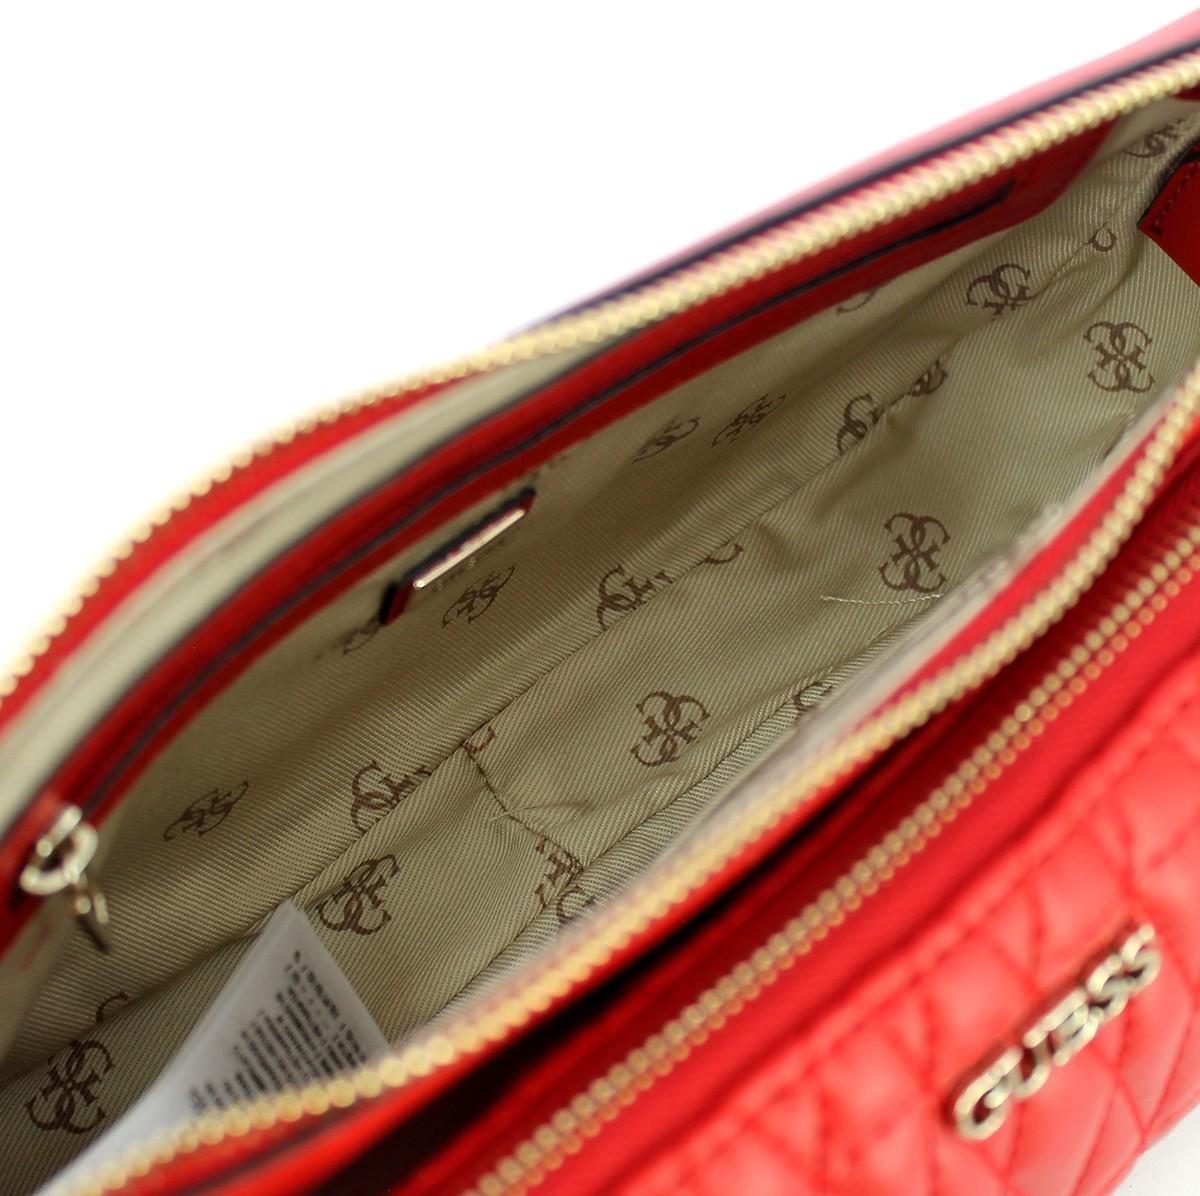 GUESS red shoulder bags - Made in Vietnam Products